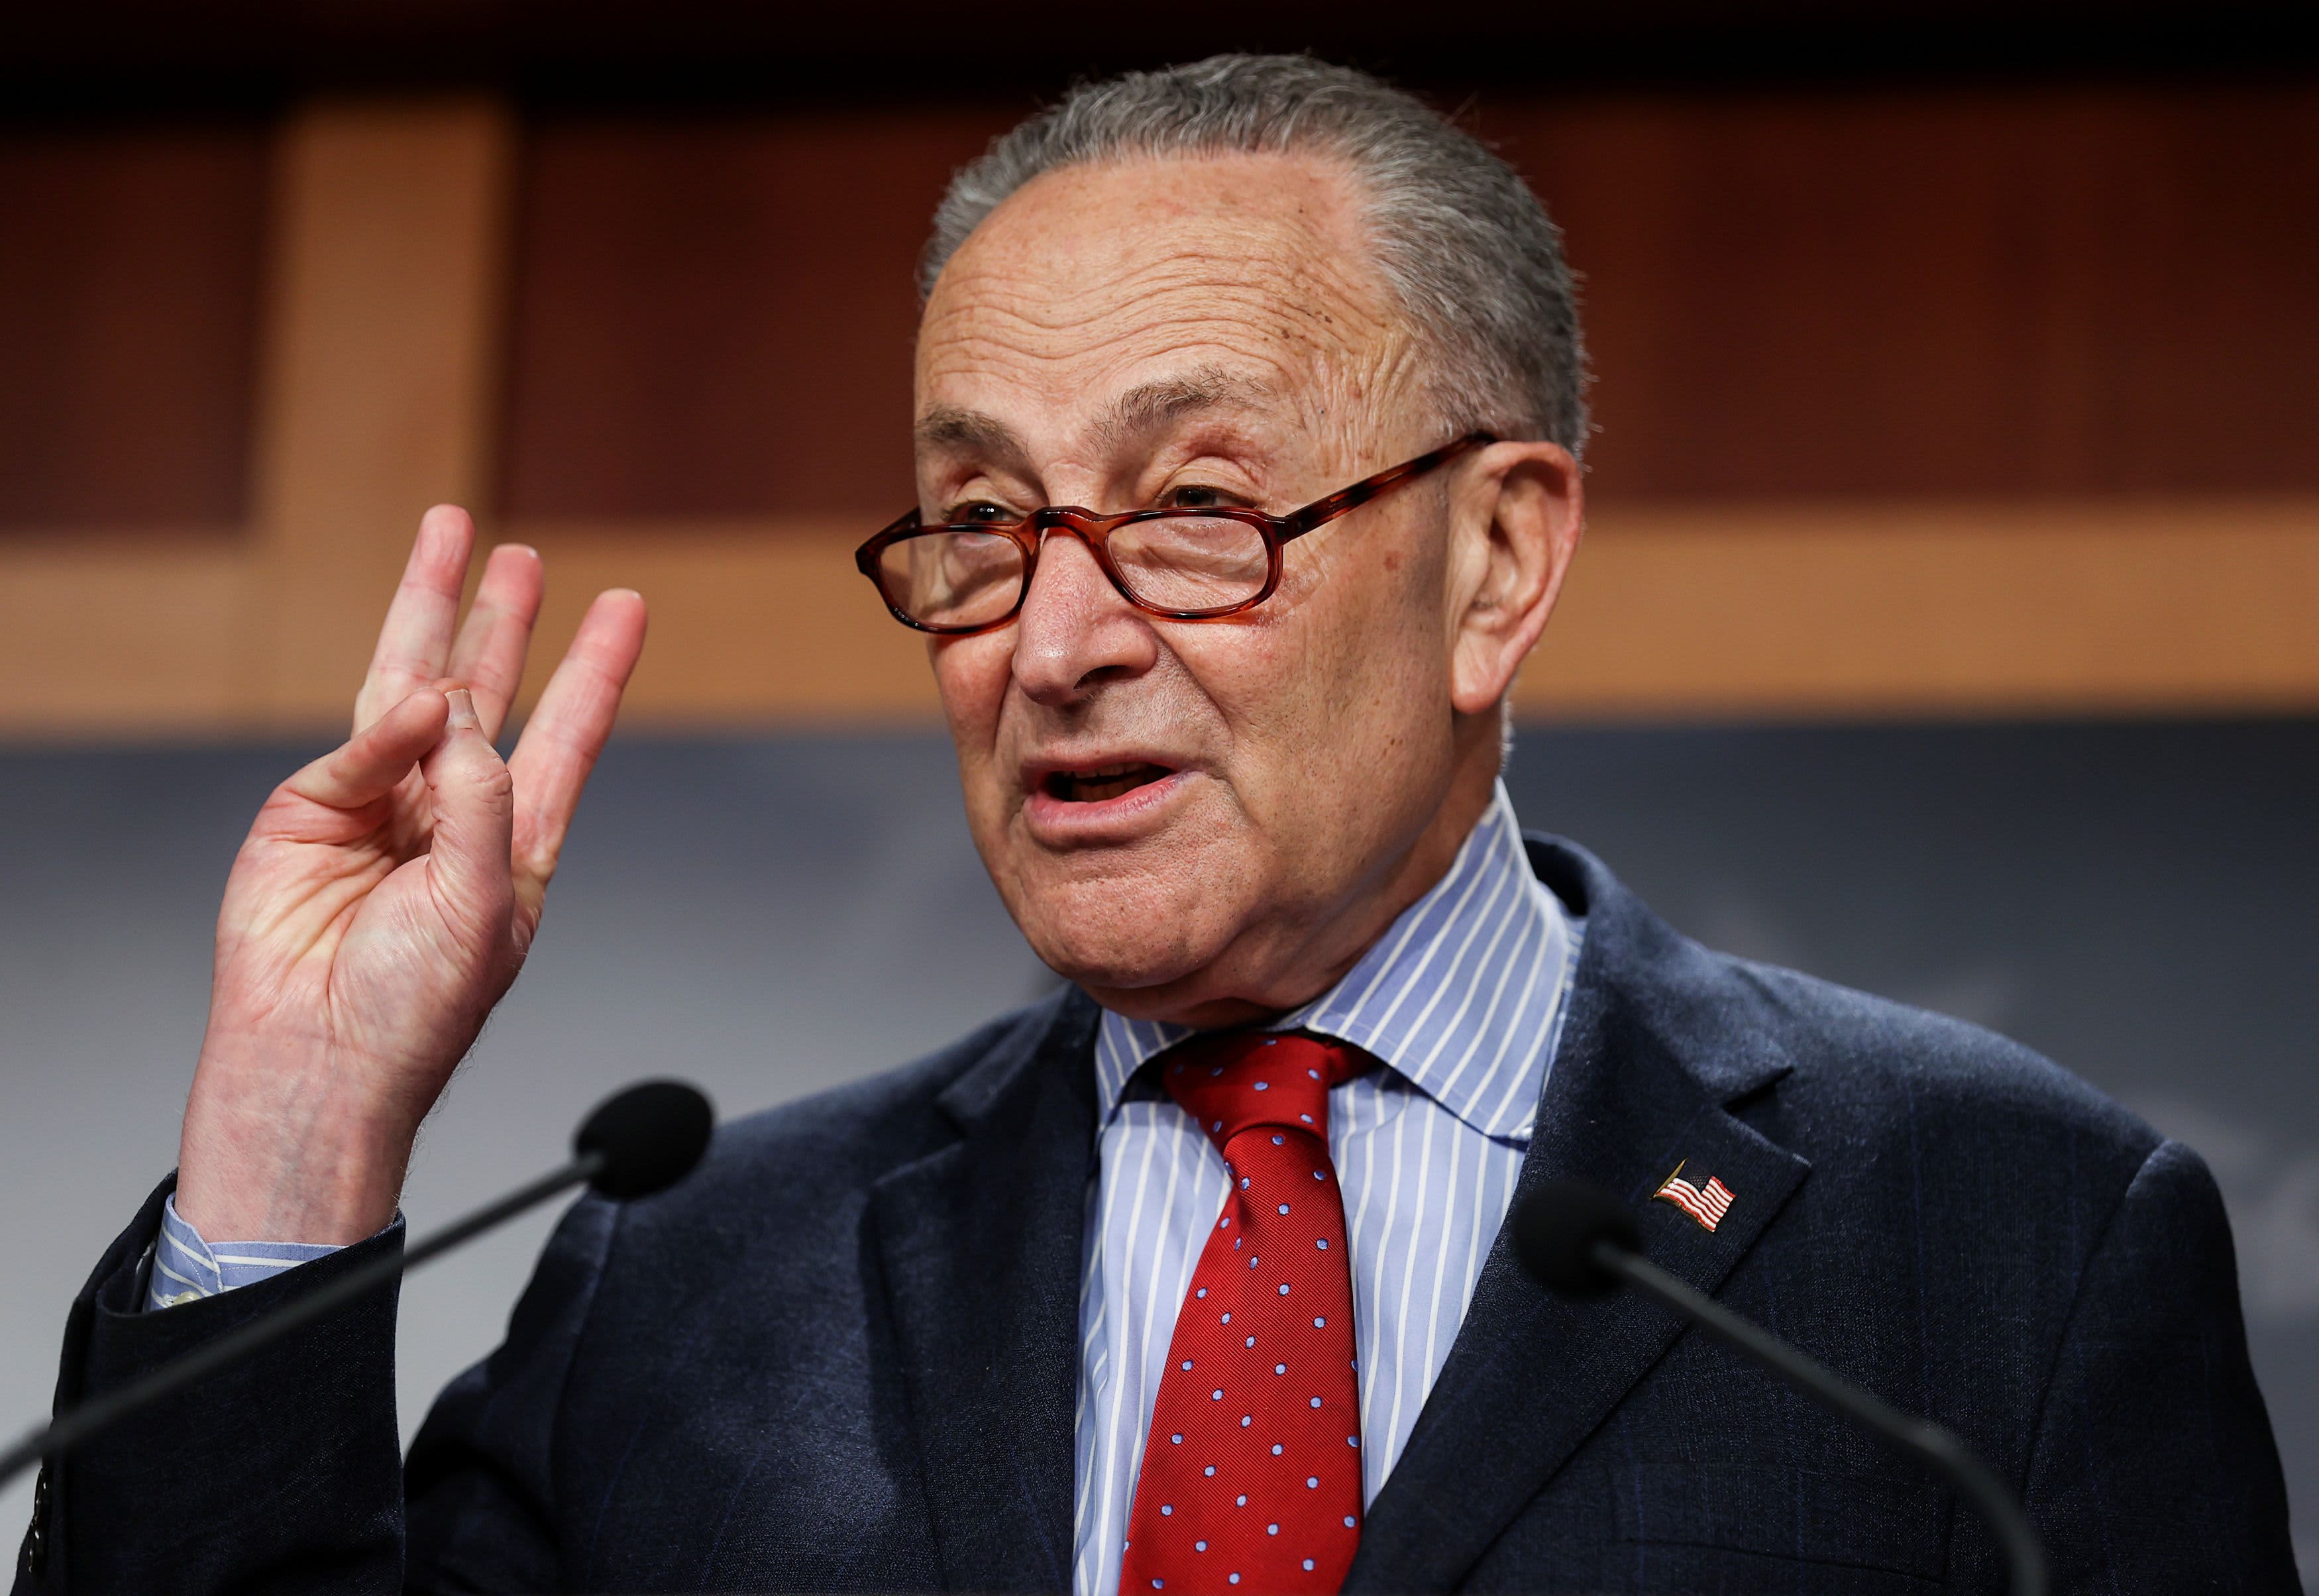 Chuck Schumer says the Senate can pass another bill through budget reconciliation